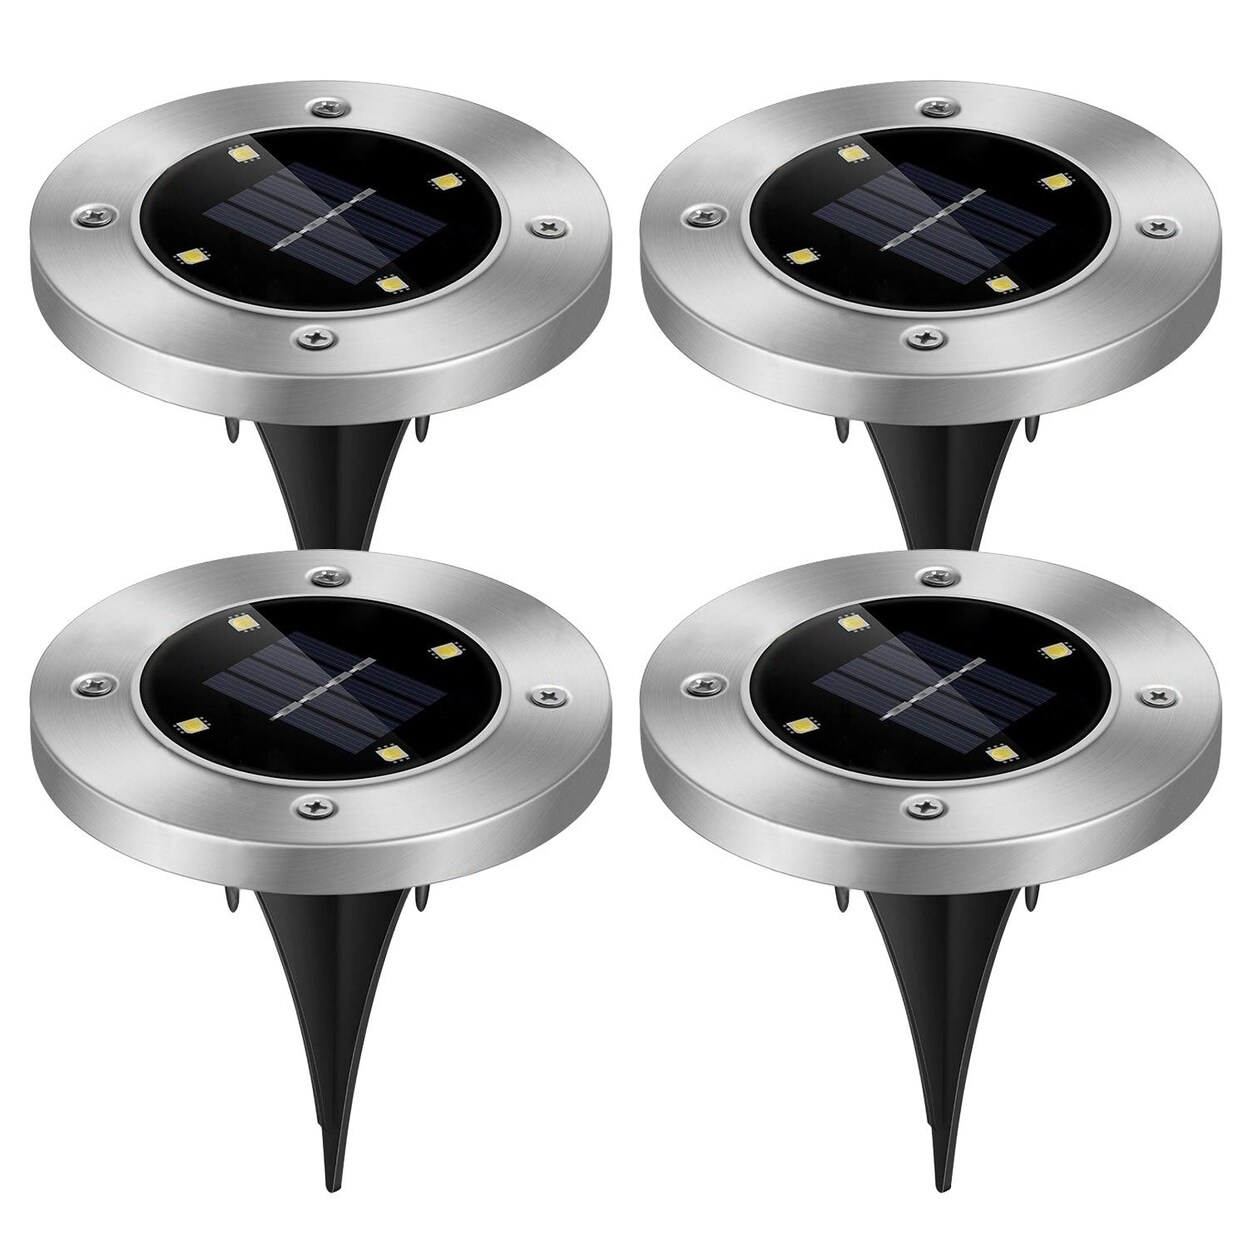 SKUSHOPS 4pcs Solar Ground Light Waterproof Buried Light In-Ground Path Deck Lawn Patio Light 4LED